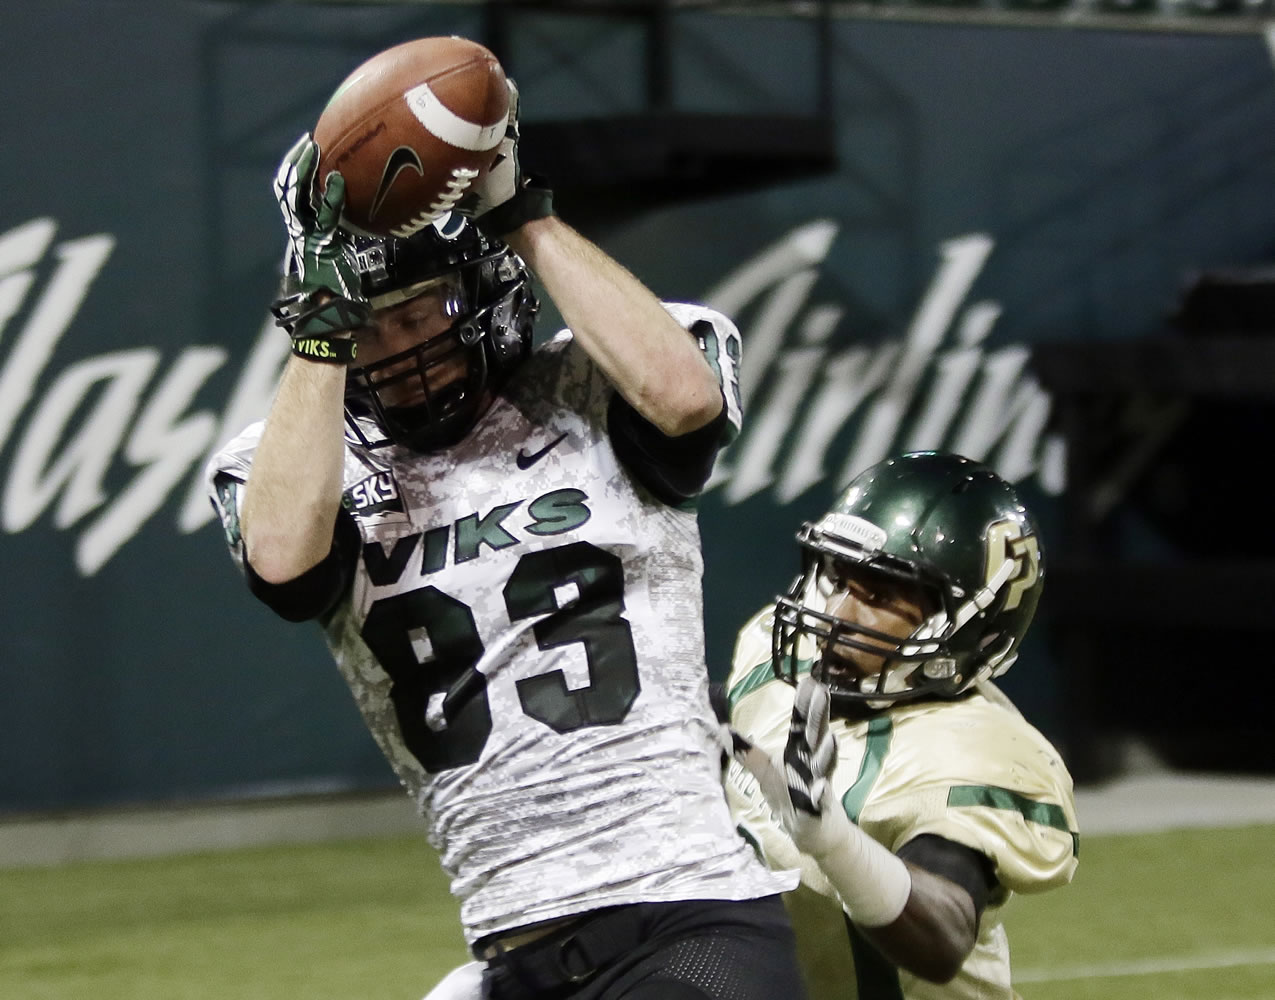 Portland State wide receiver Alex Toureen (83) hauls in a touchdown pass against Cal Poly defender Karlton Dennis during the first half Thursday.